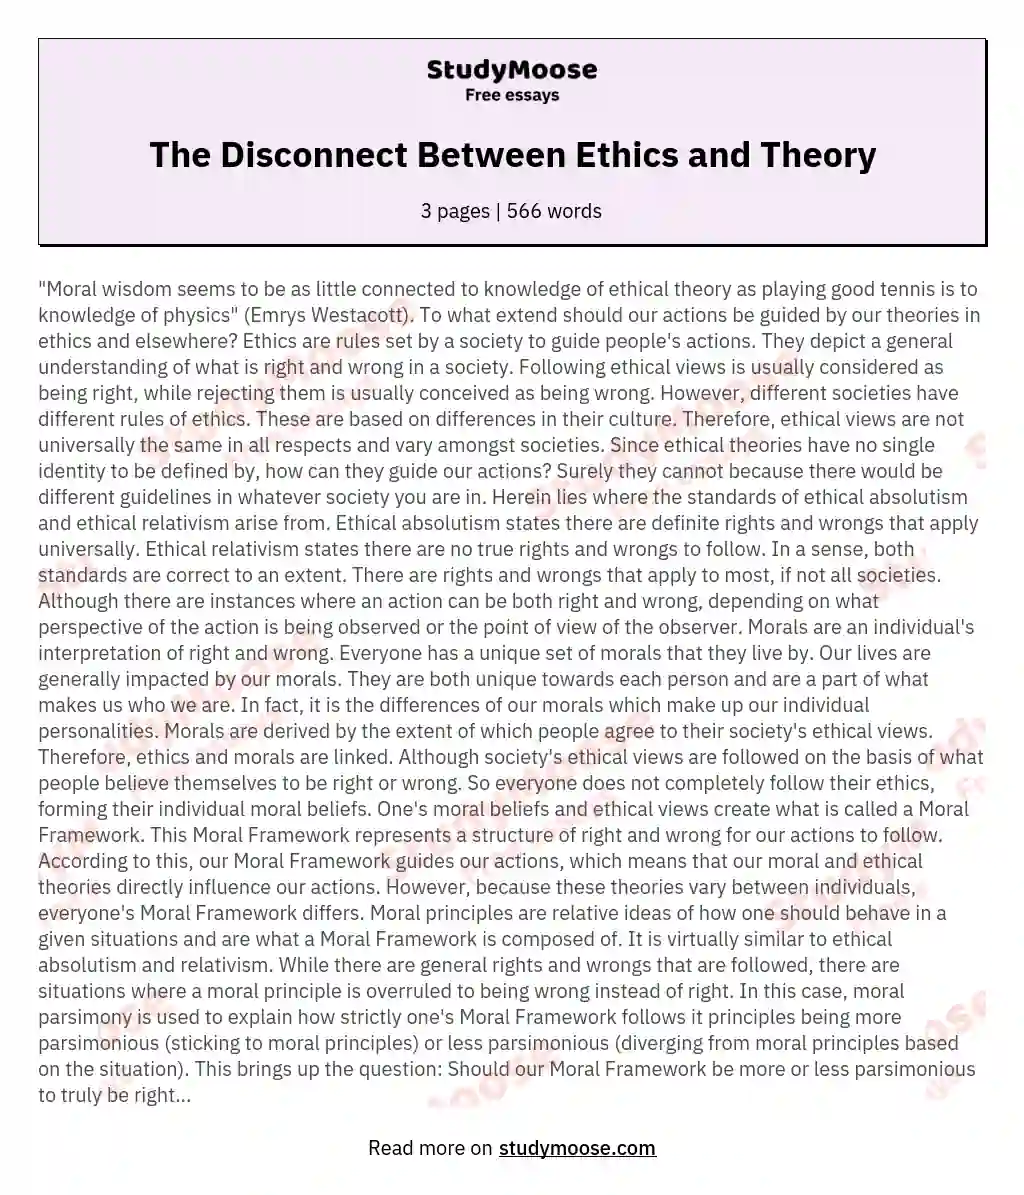 The Disconnect Between Ethics and Theory essay